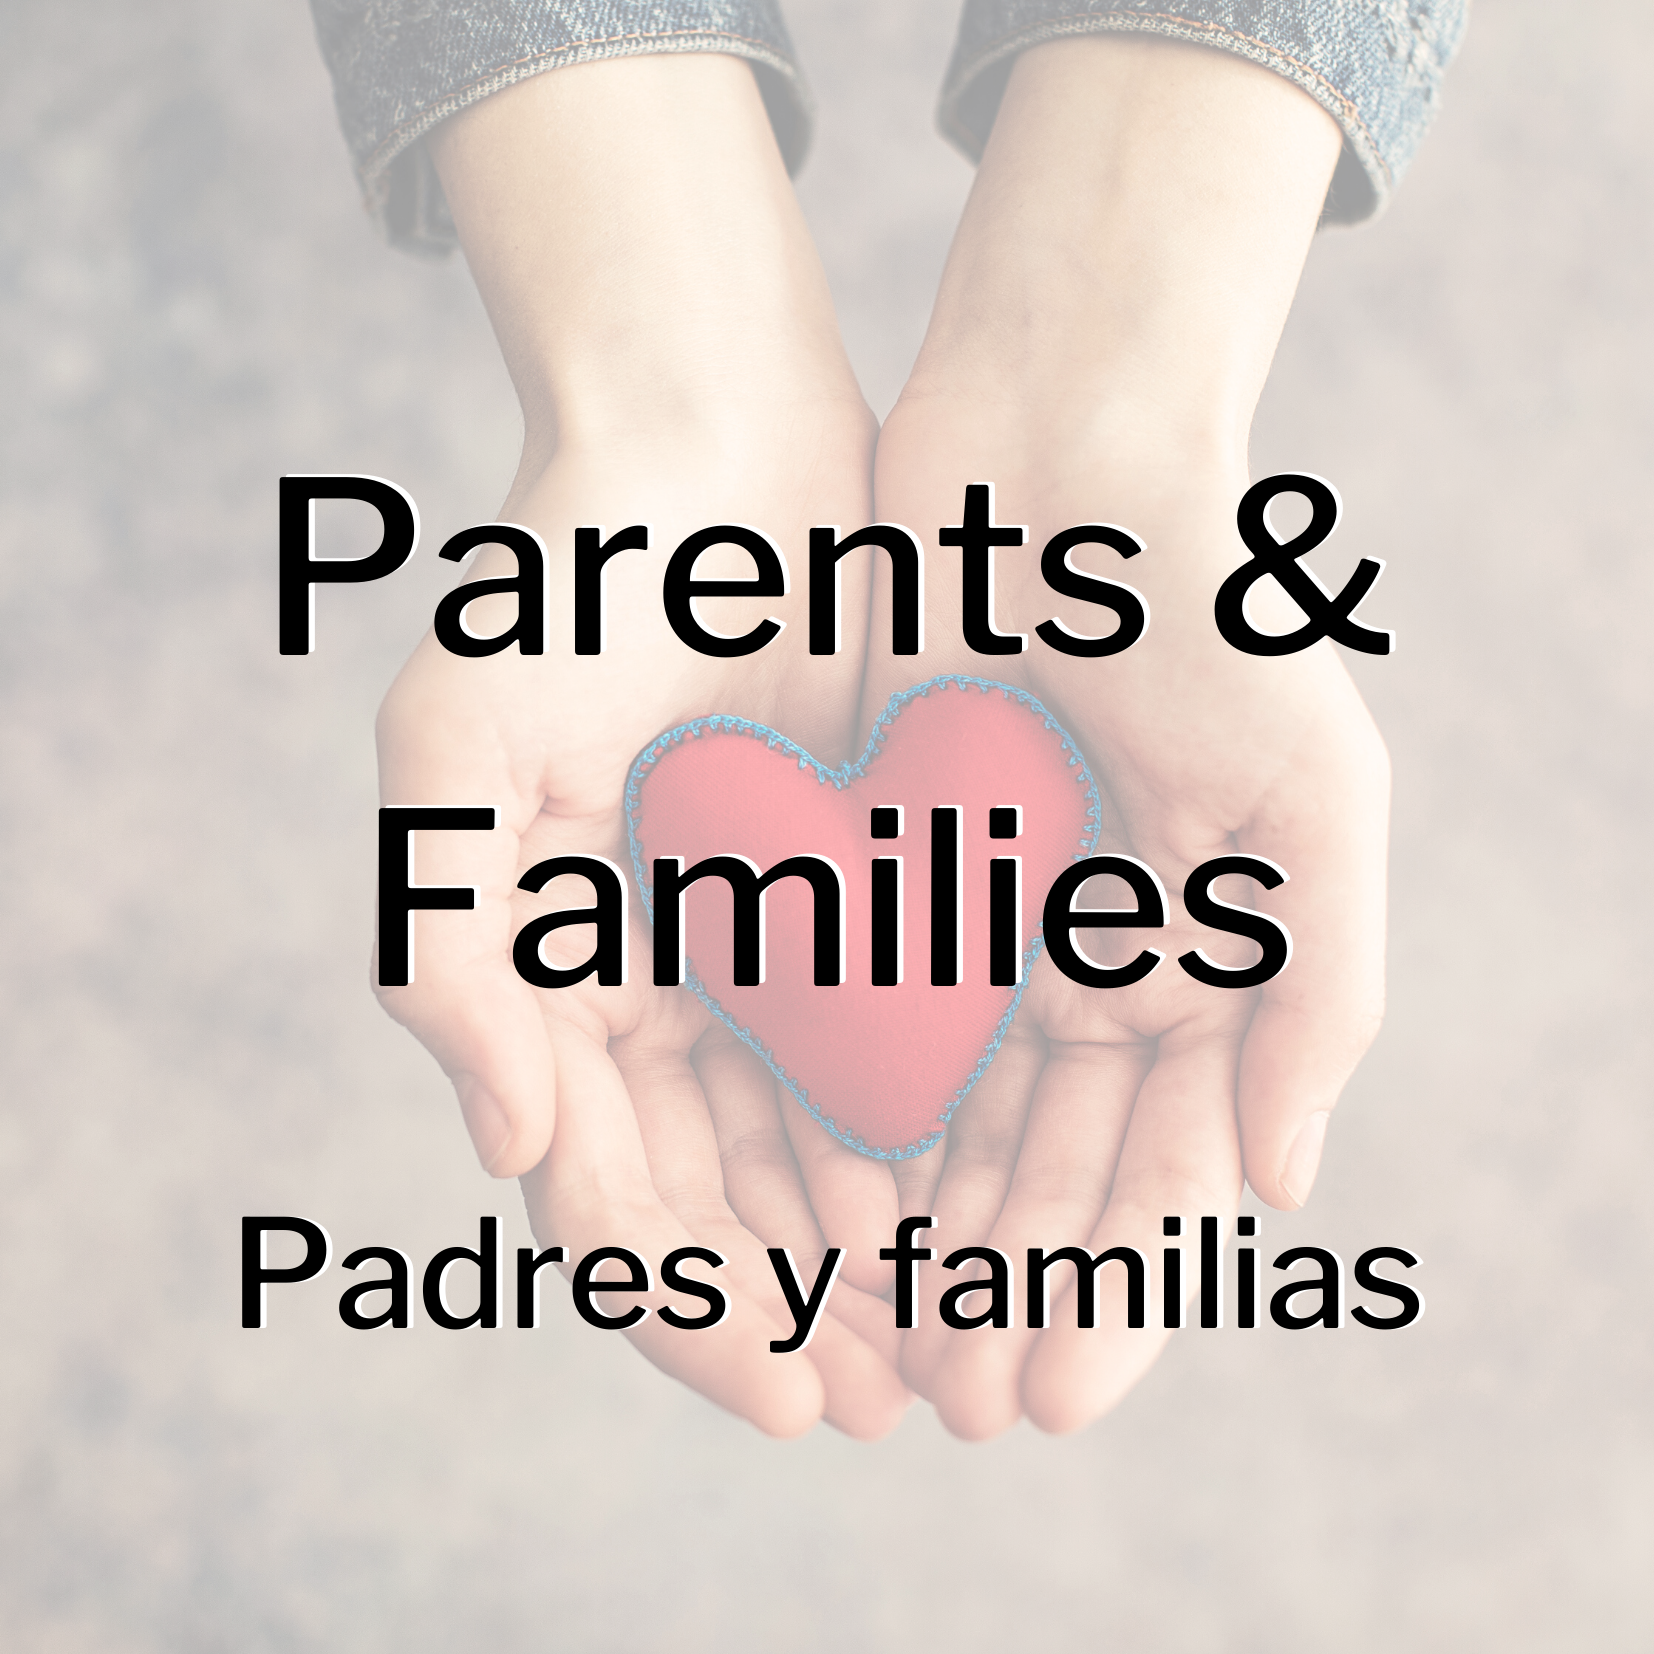 Parents and Families